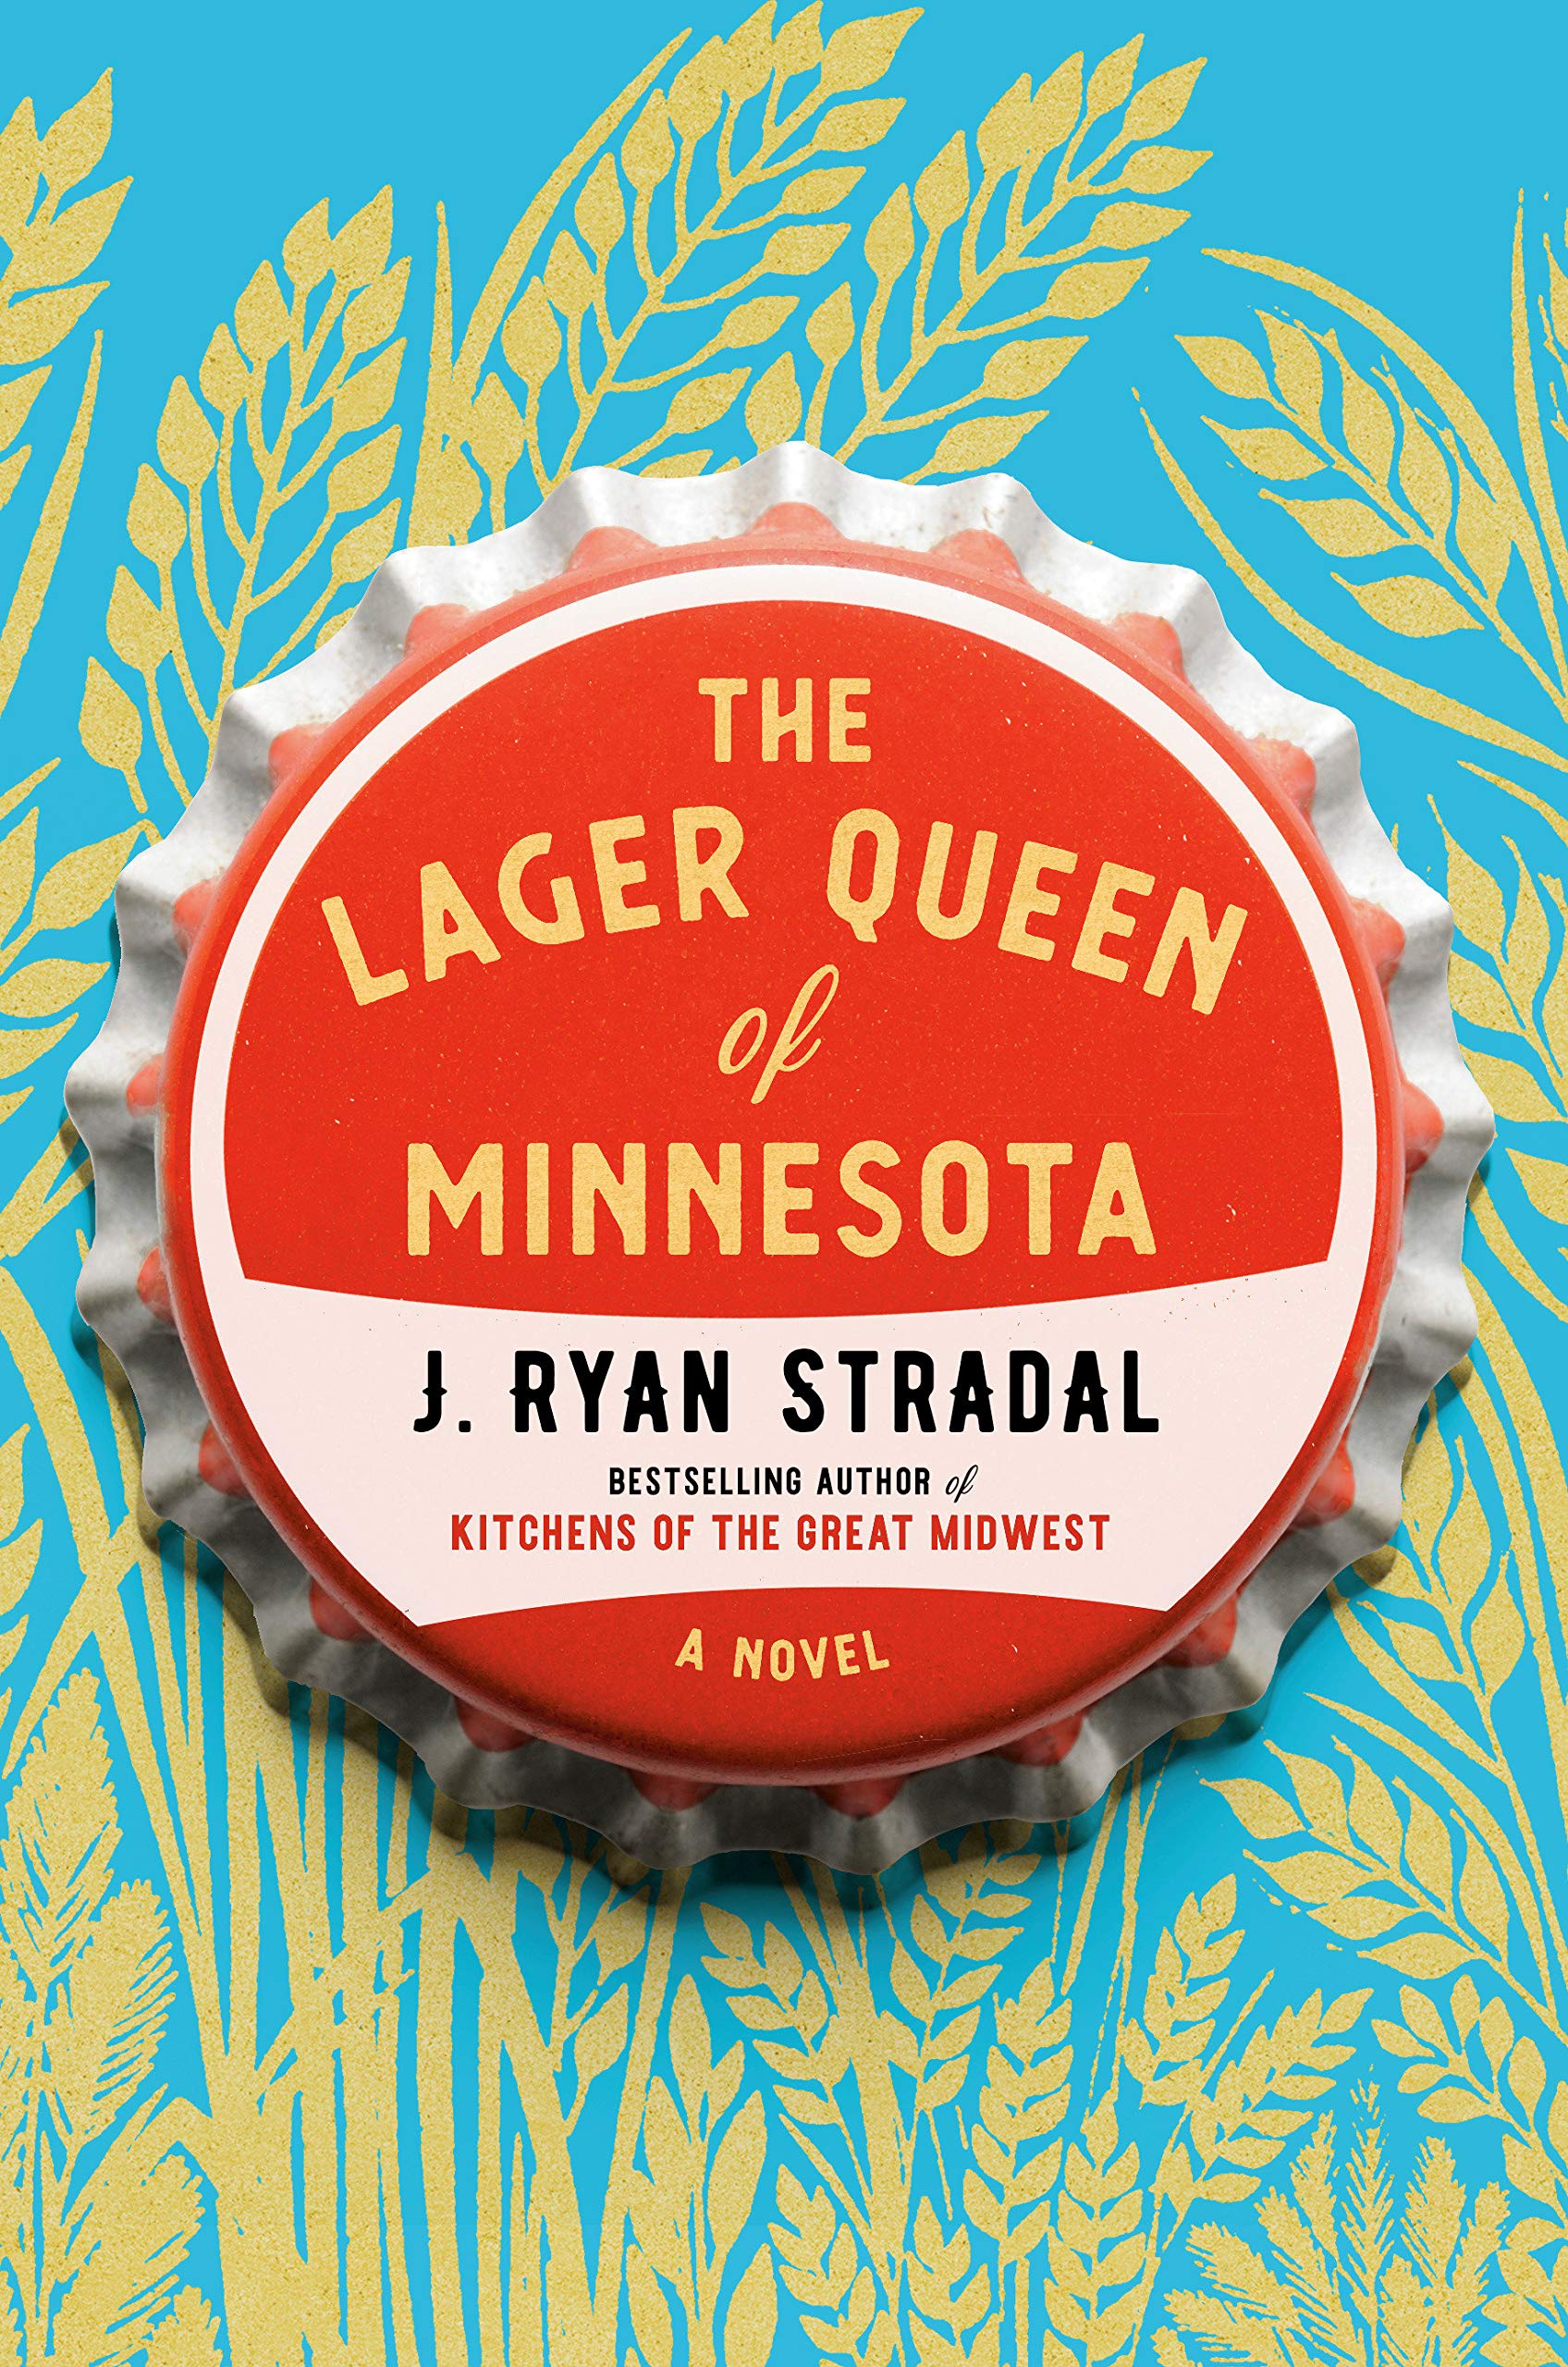 Image of the book cover for The Lager Queen of Minnesota by J. Ryan Stradal